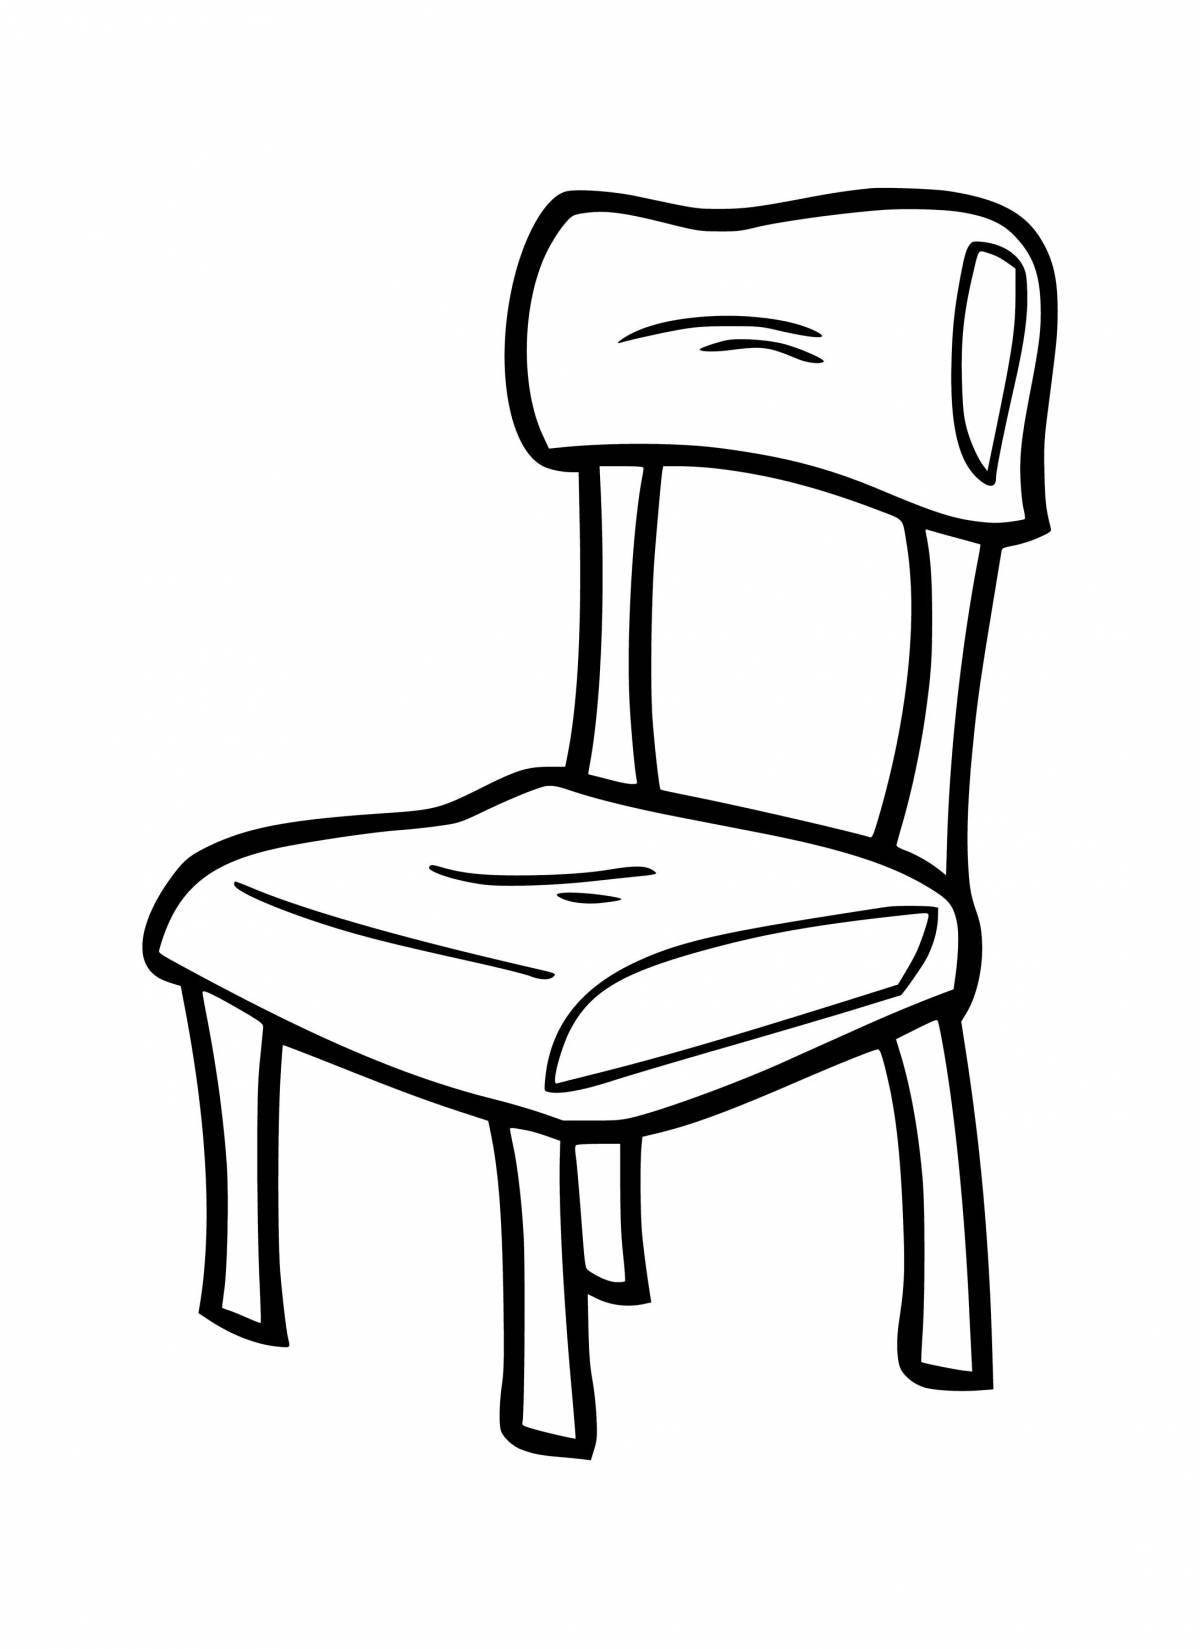 Coloring book shiny high chair